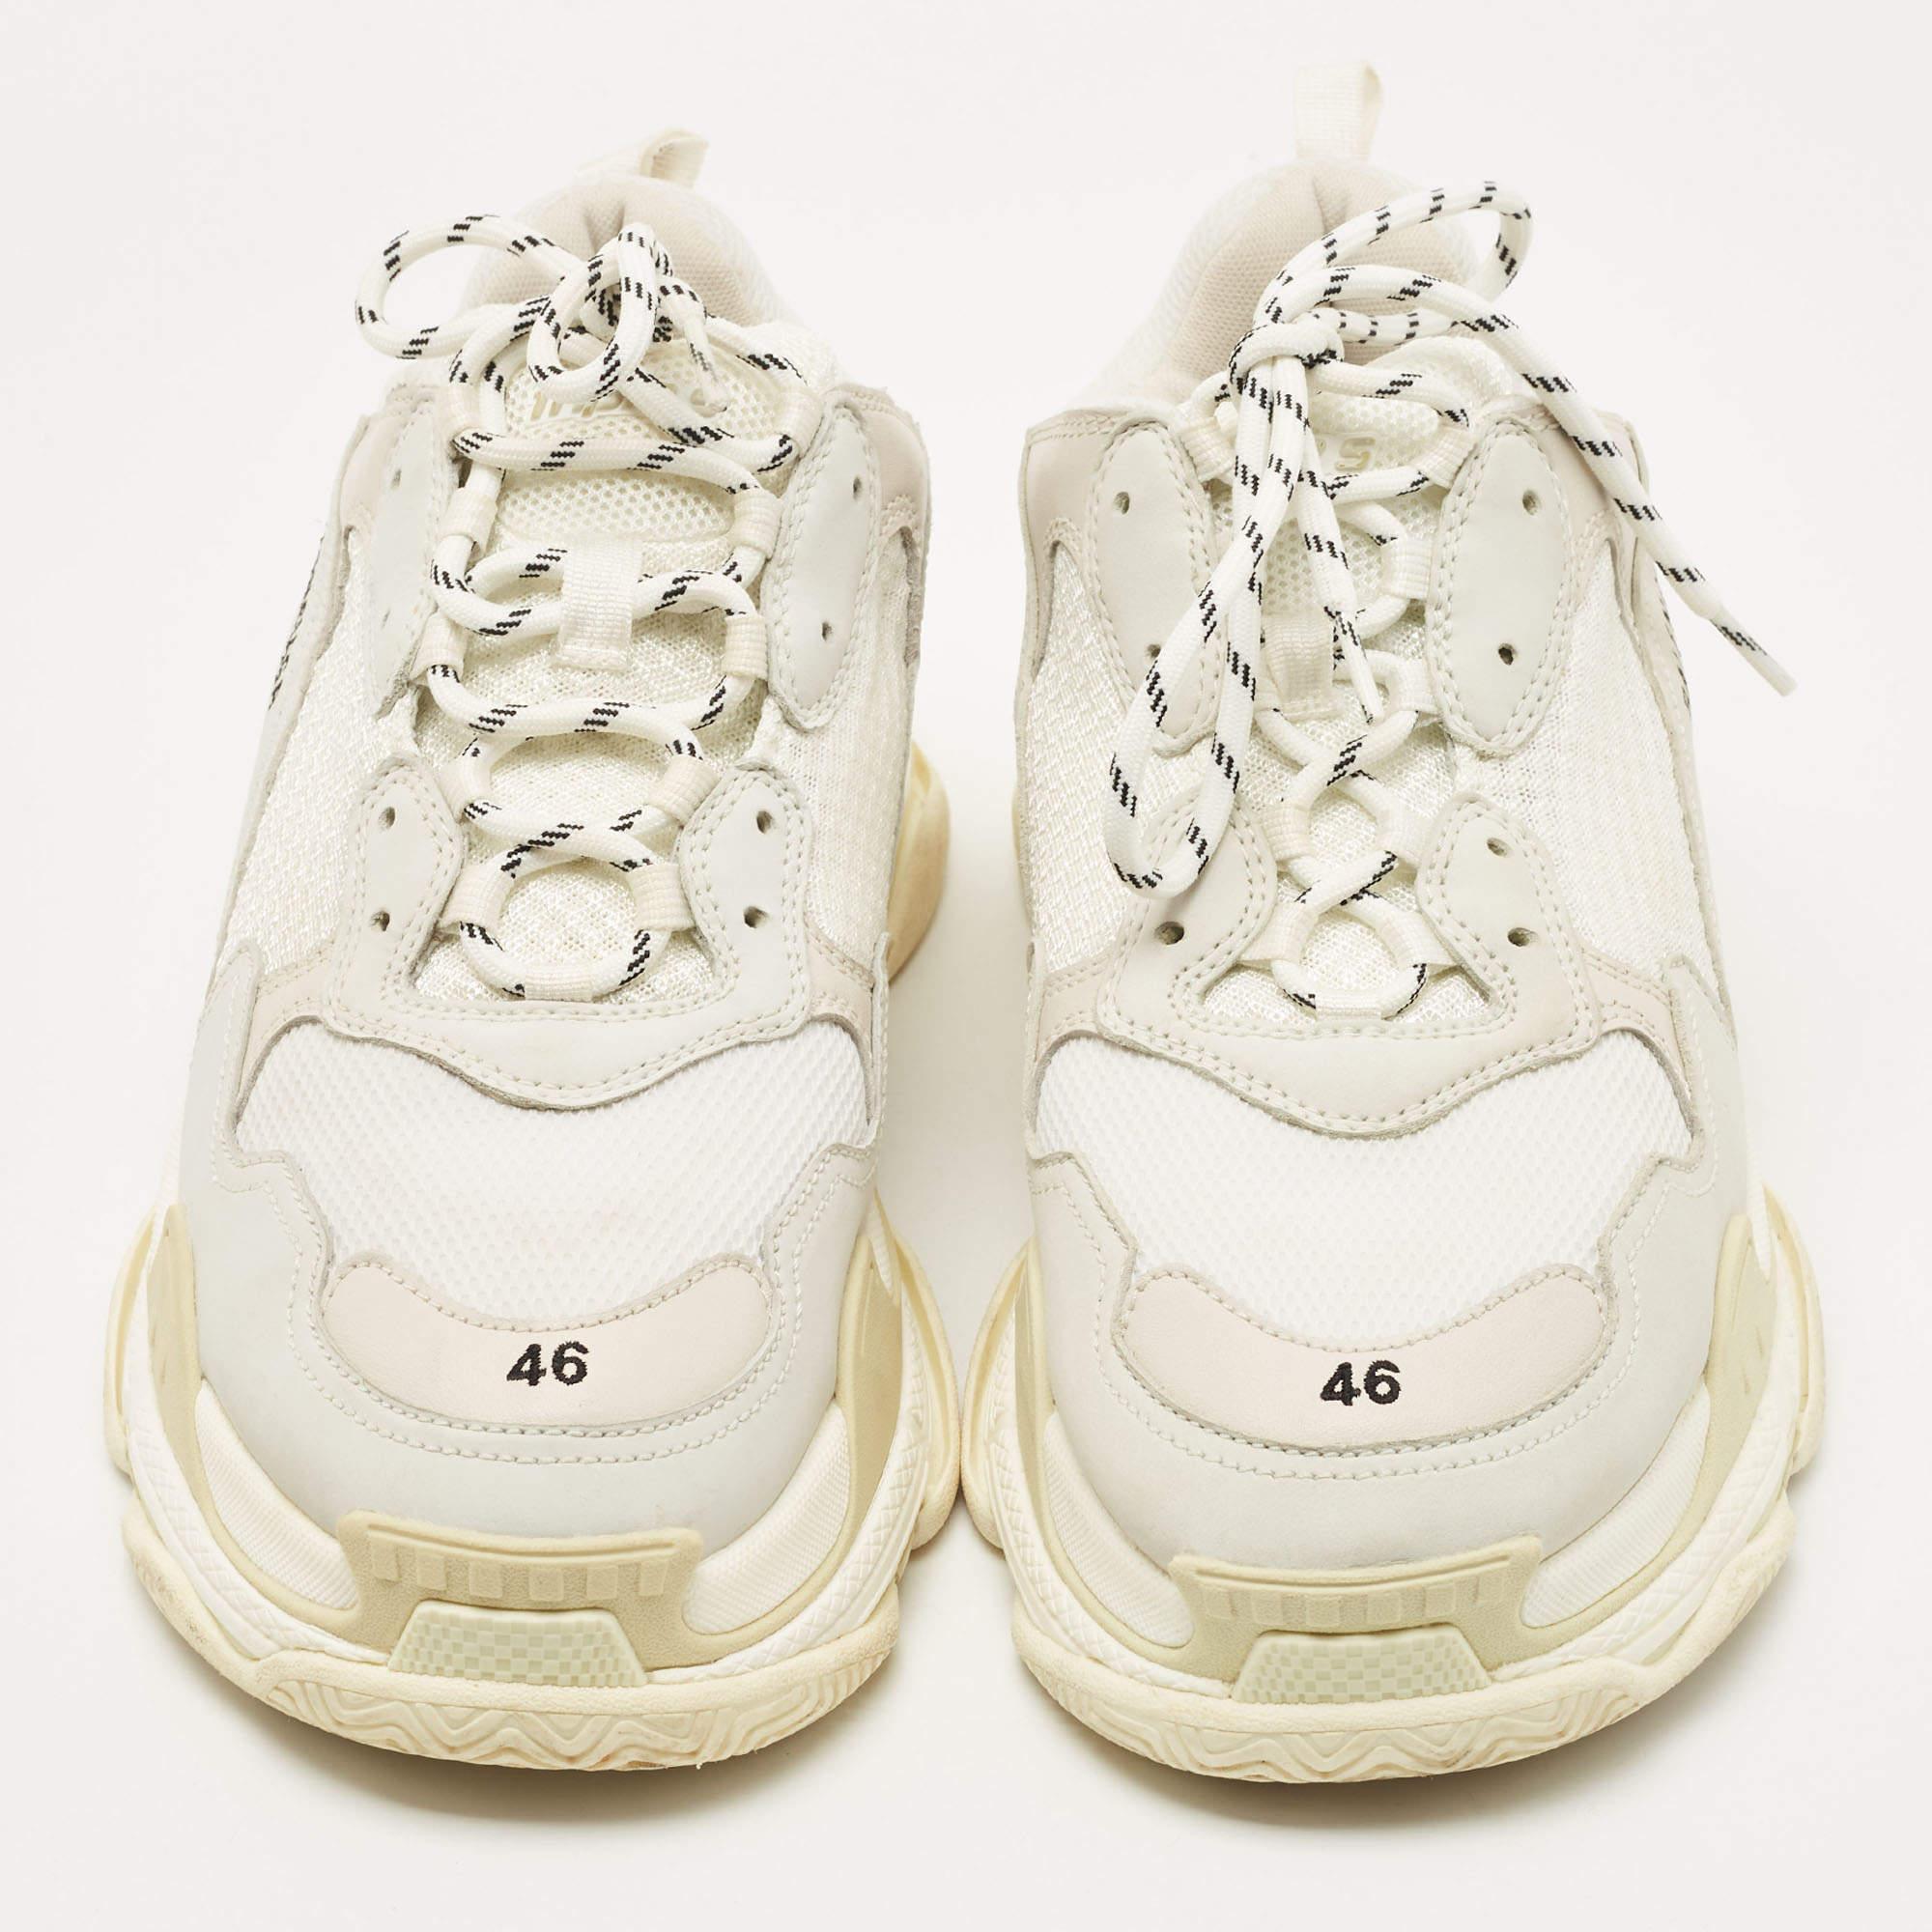 Give your outfit a luxe update with this pair of Balenciaga sneakers. The shoes are sewn perfectly to help you make a statement in them for a long time.

